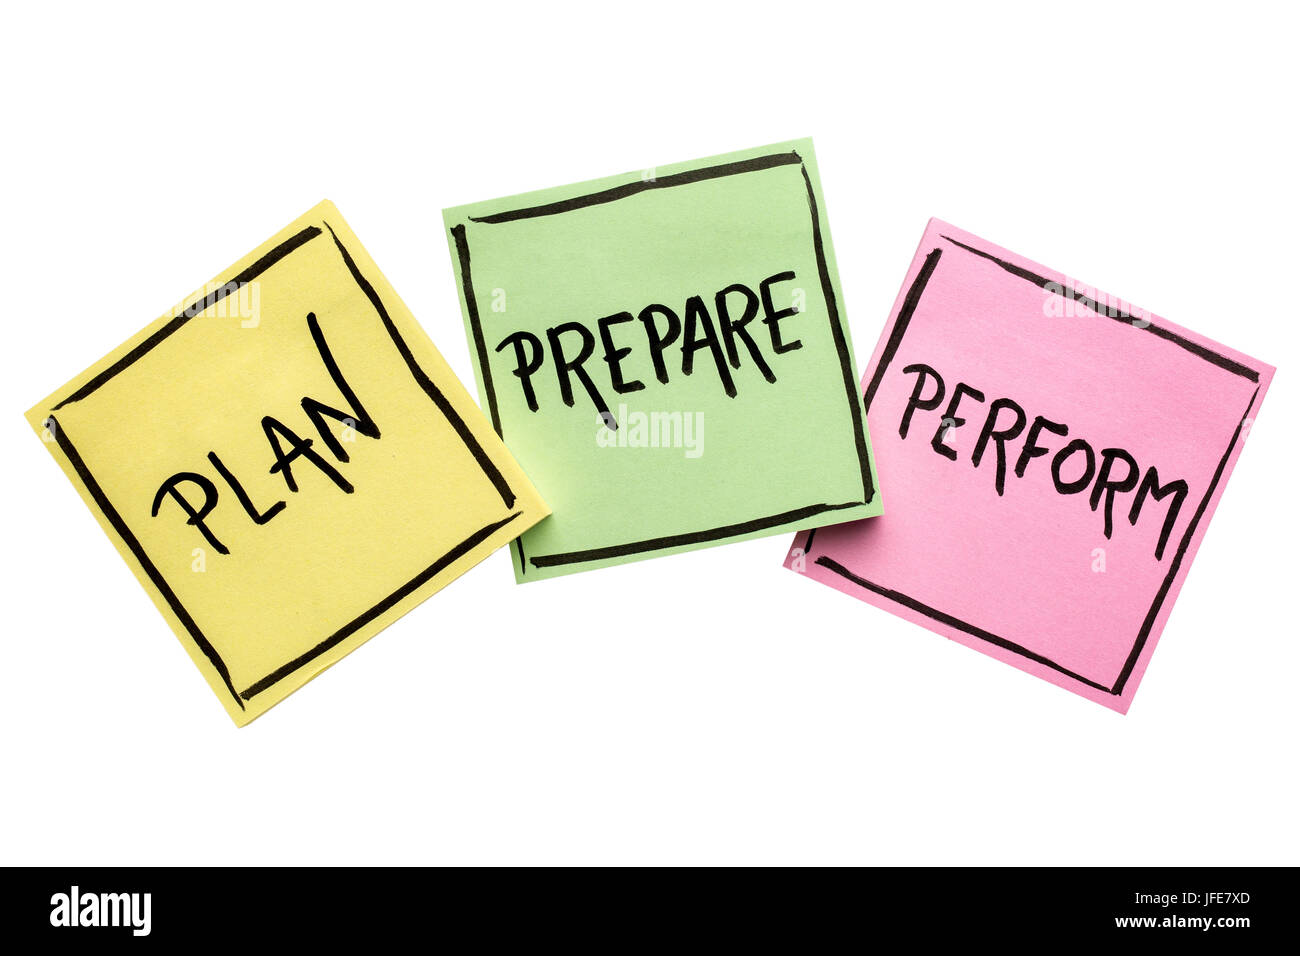 plan, prepare, perform - handwriting with black ink on isolated sticky notes Stock Photo